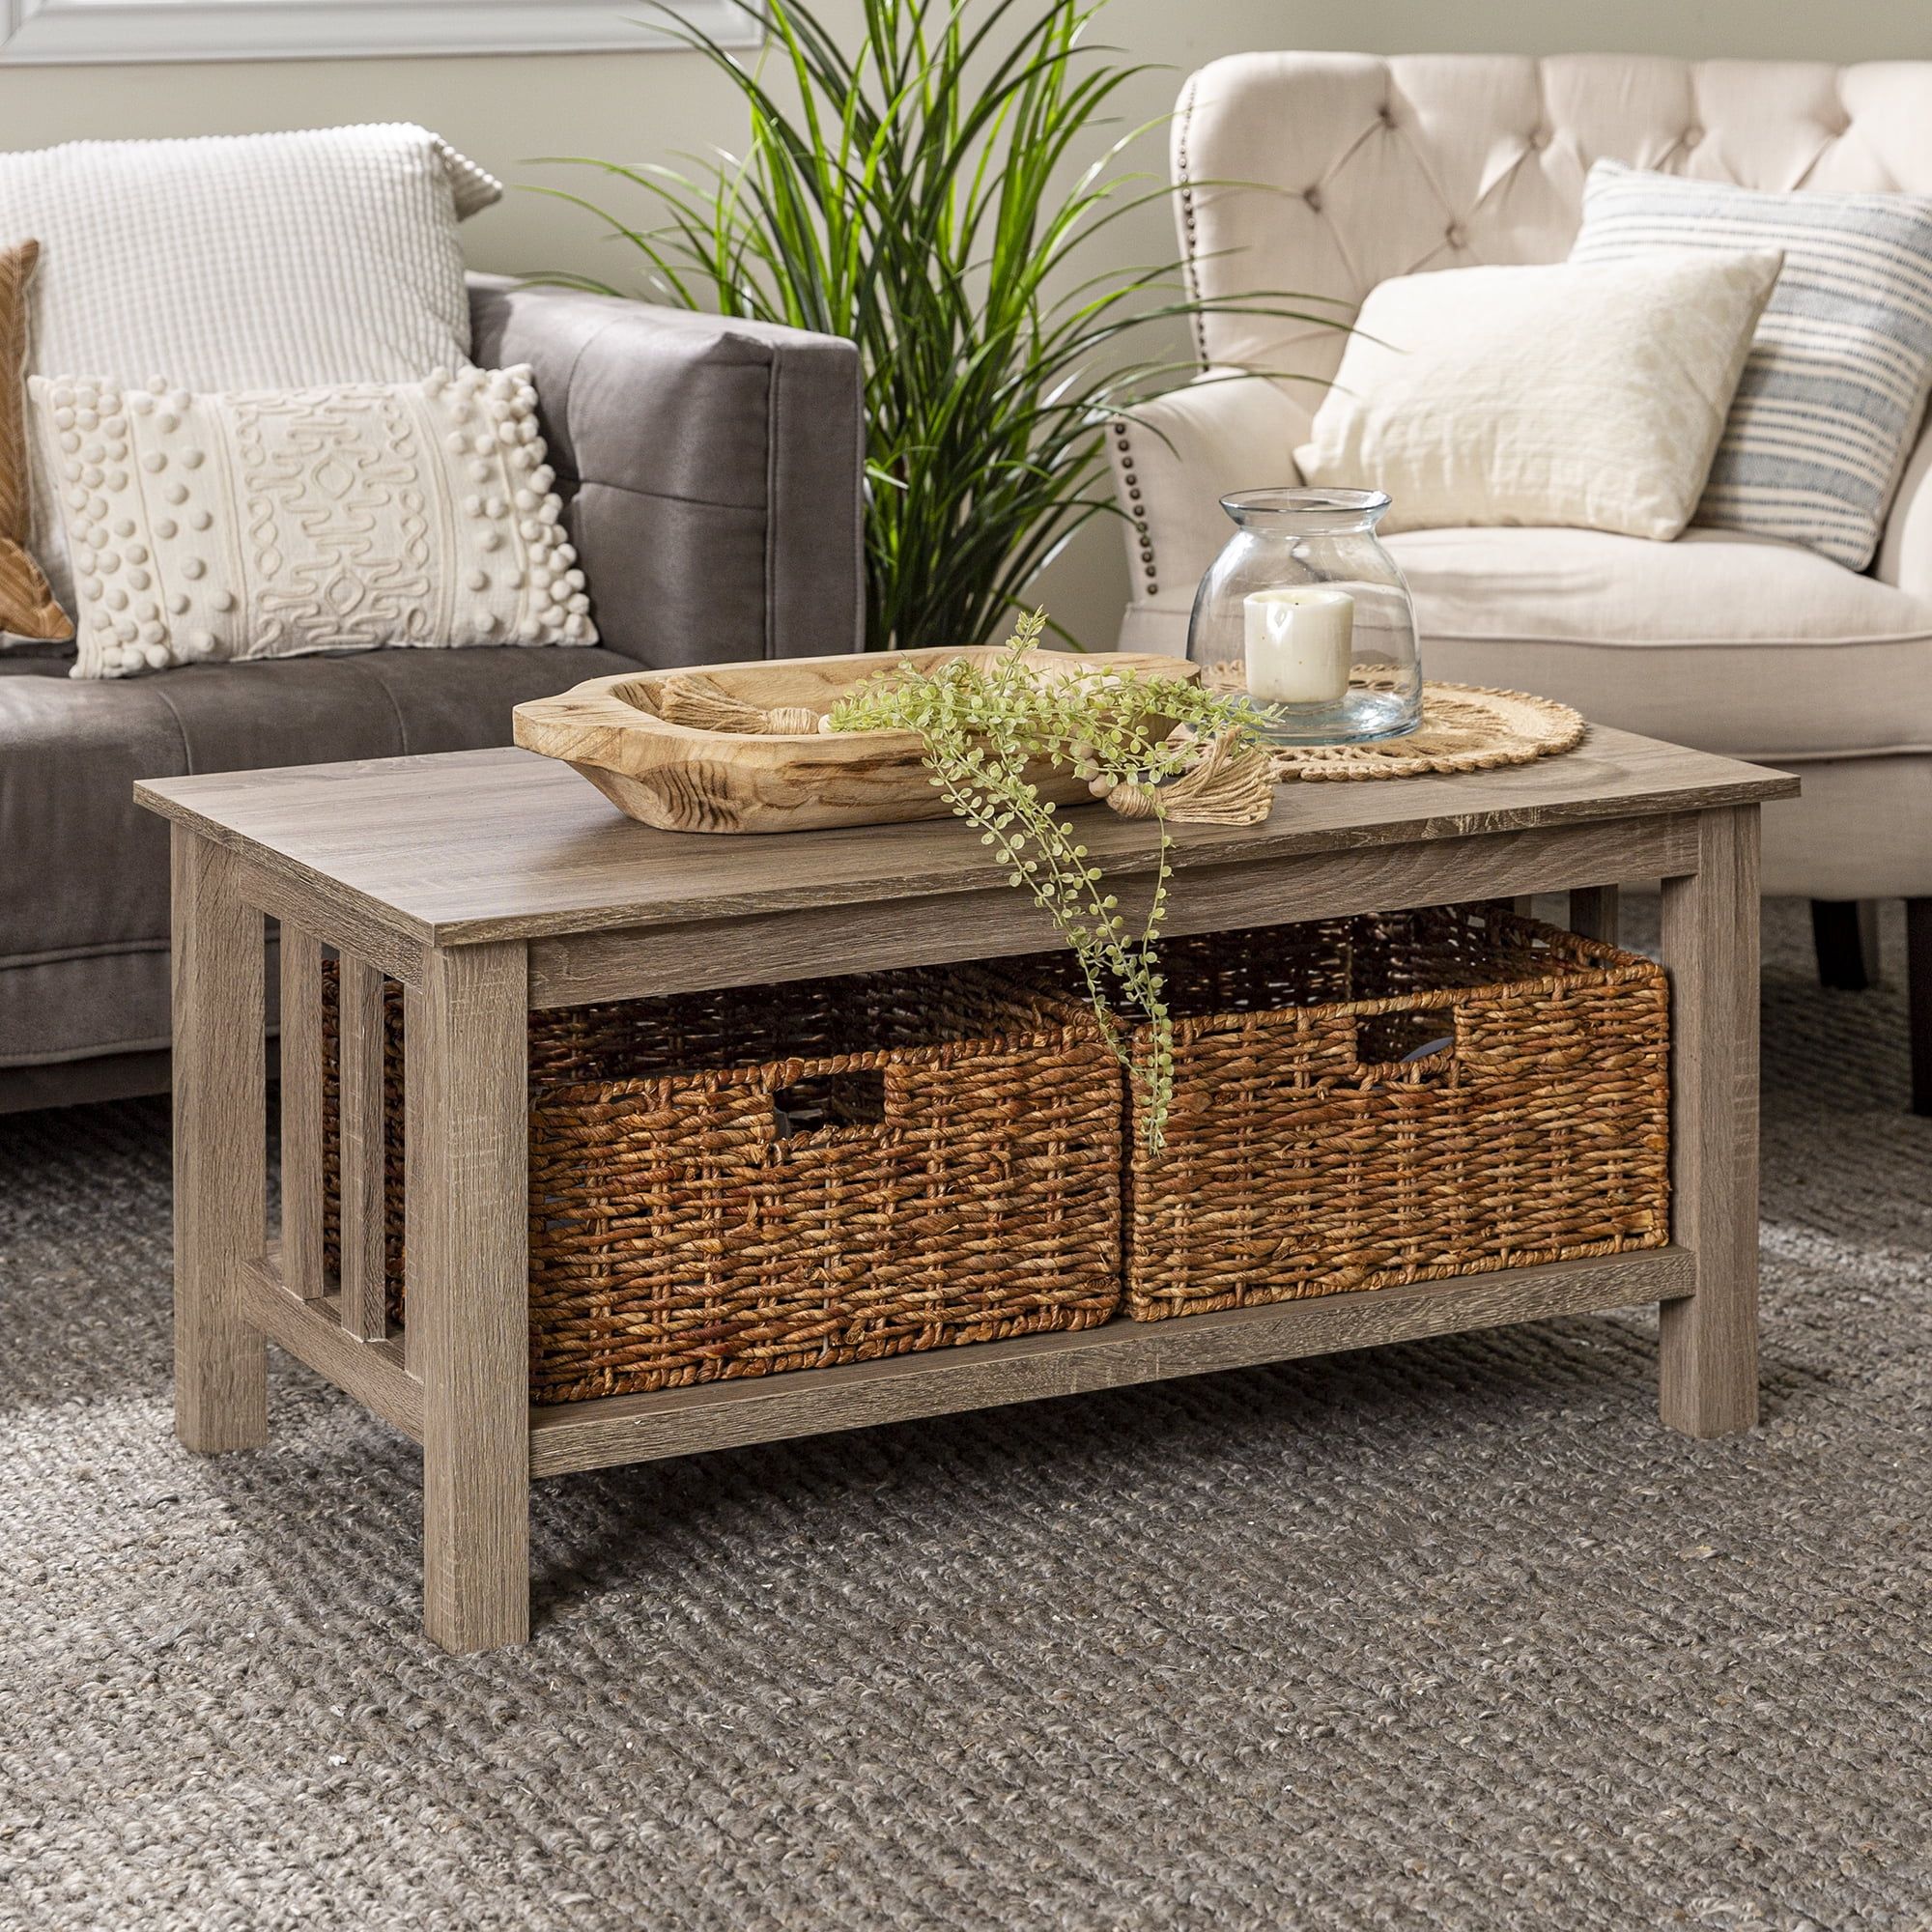 Woven Paths Traditional Storage Coffee Table With Bins, Driftwood –  Walmart In Woven Paths Coffee Tables (View 3 of 15)